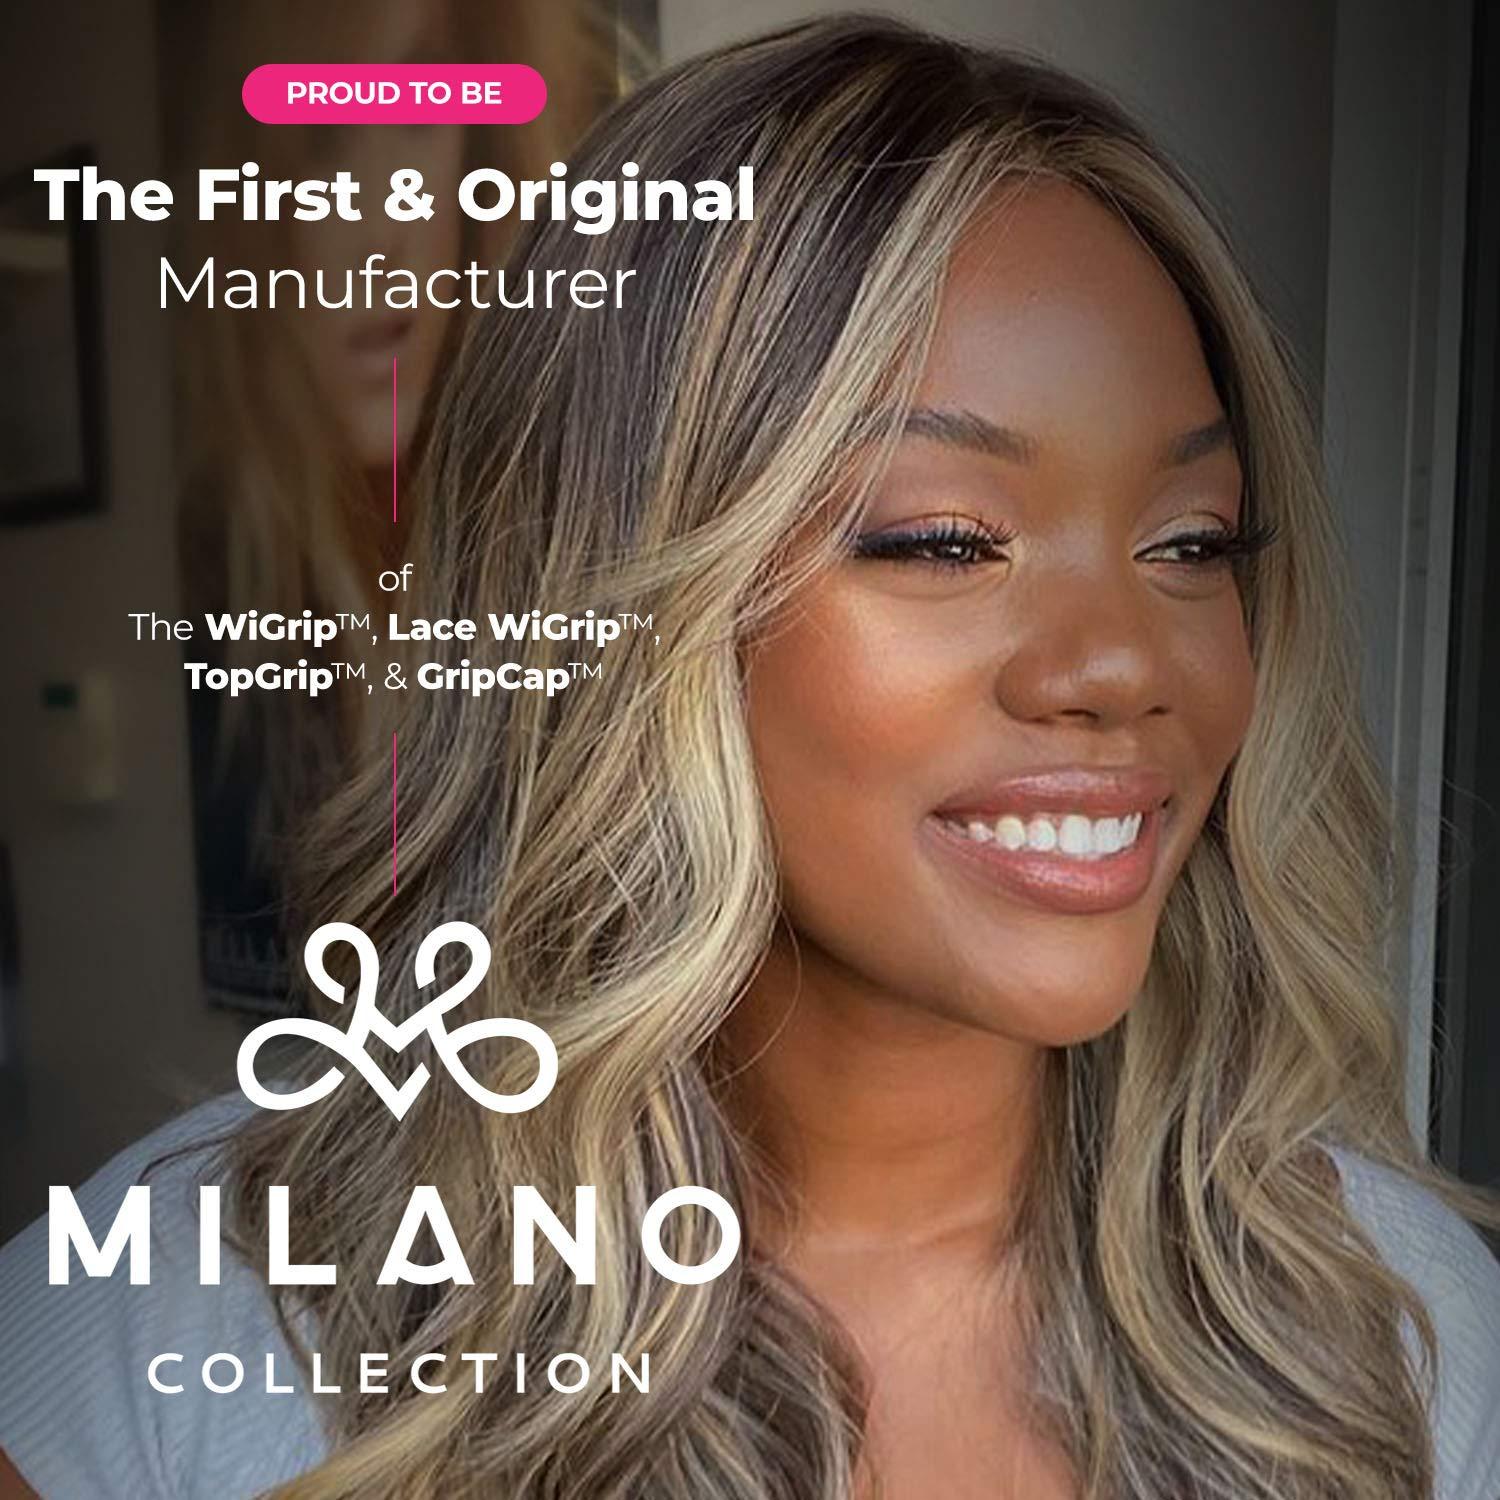 Milano Collection 3 Pack No-Slip Removable Adjustable Wig Straps for  Glueless Installs, Wig-Making & DIY in Soft Comfort Elastic Material,  Secure Non-Slip Wig Bands (Black)